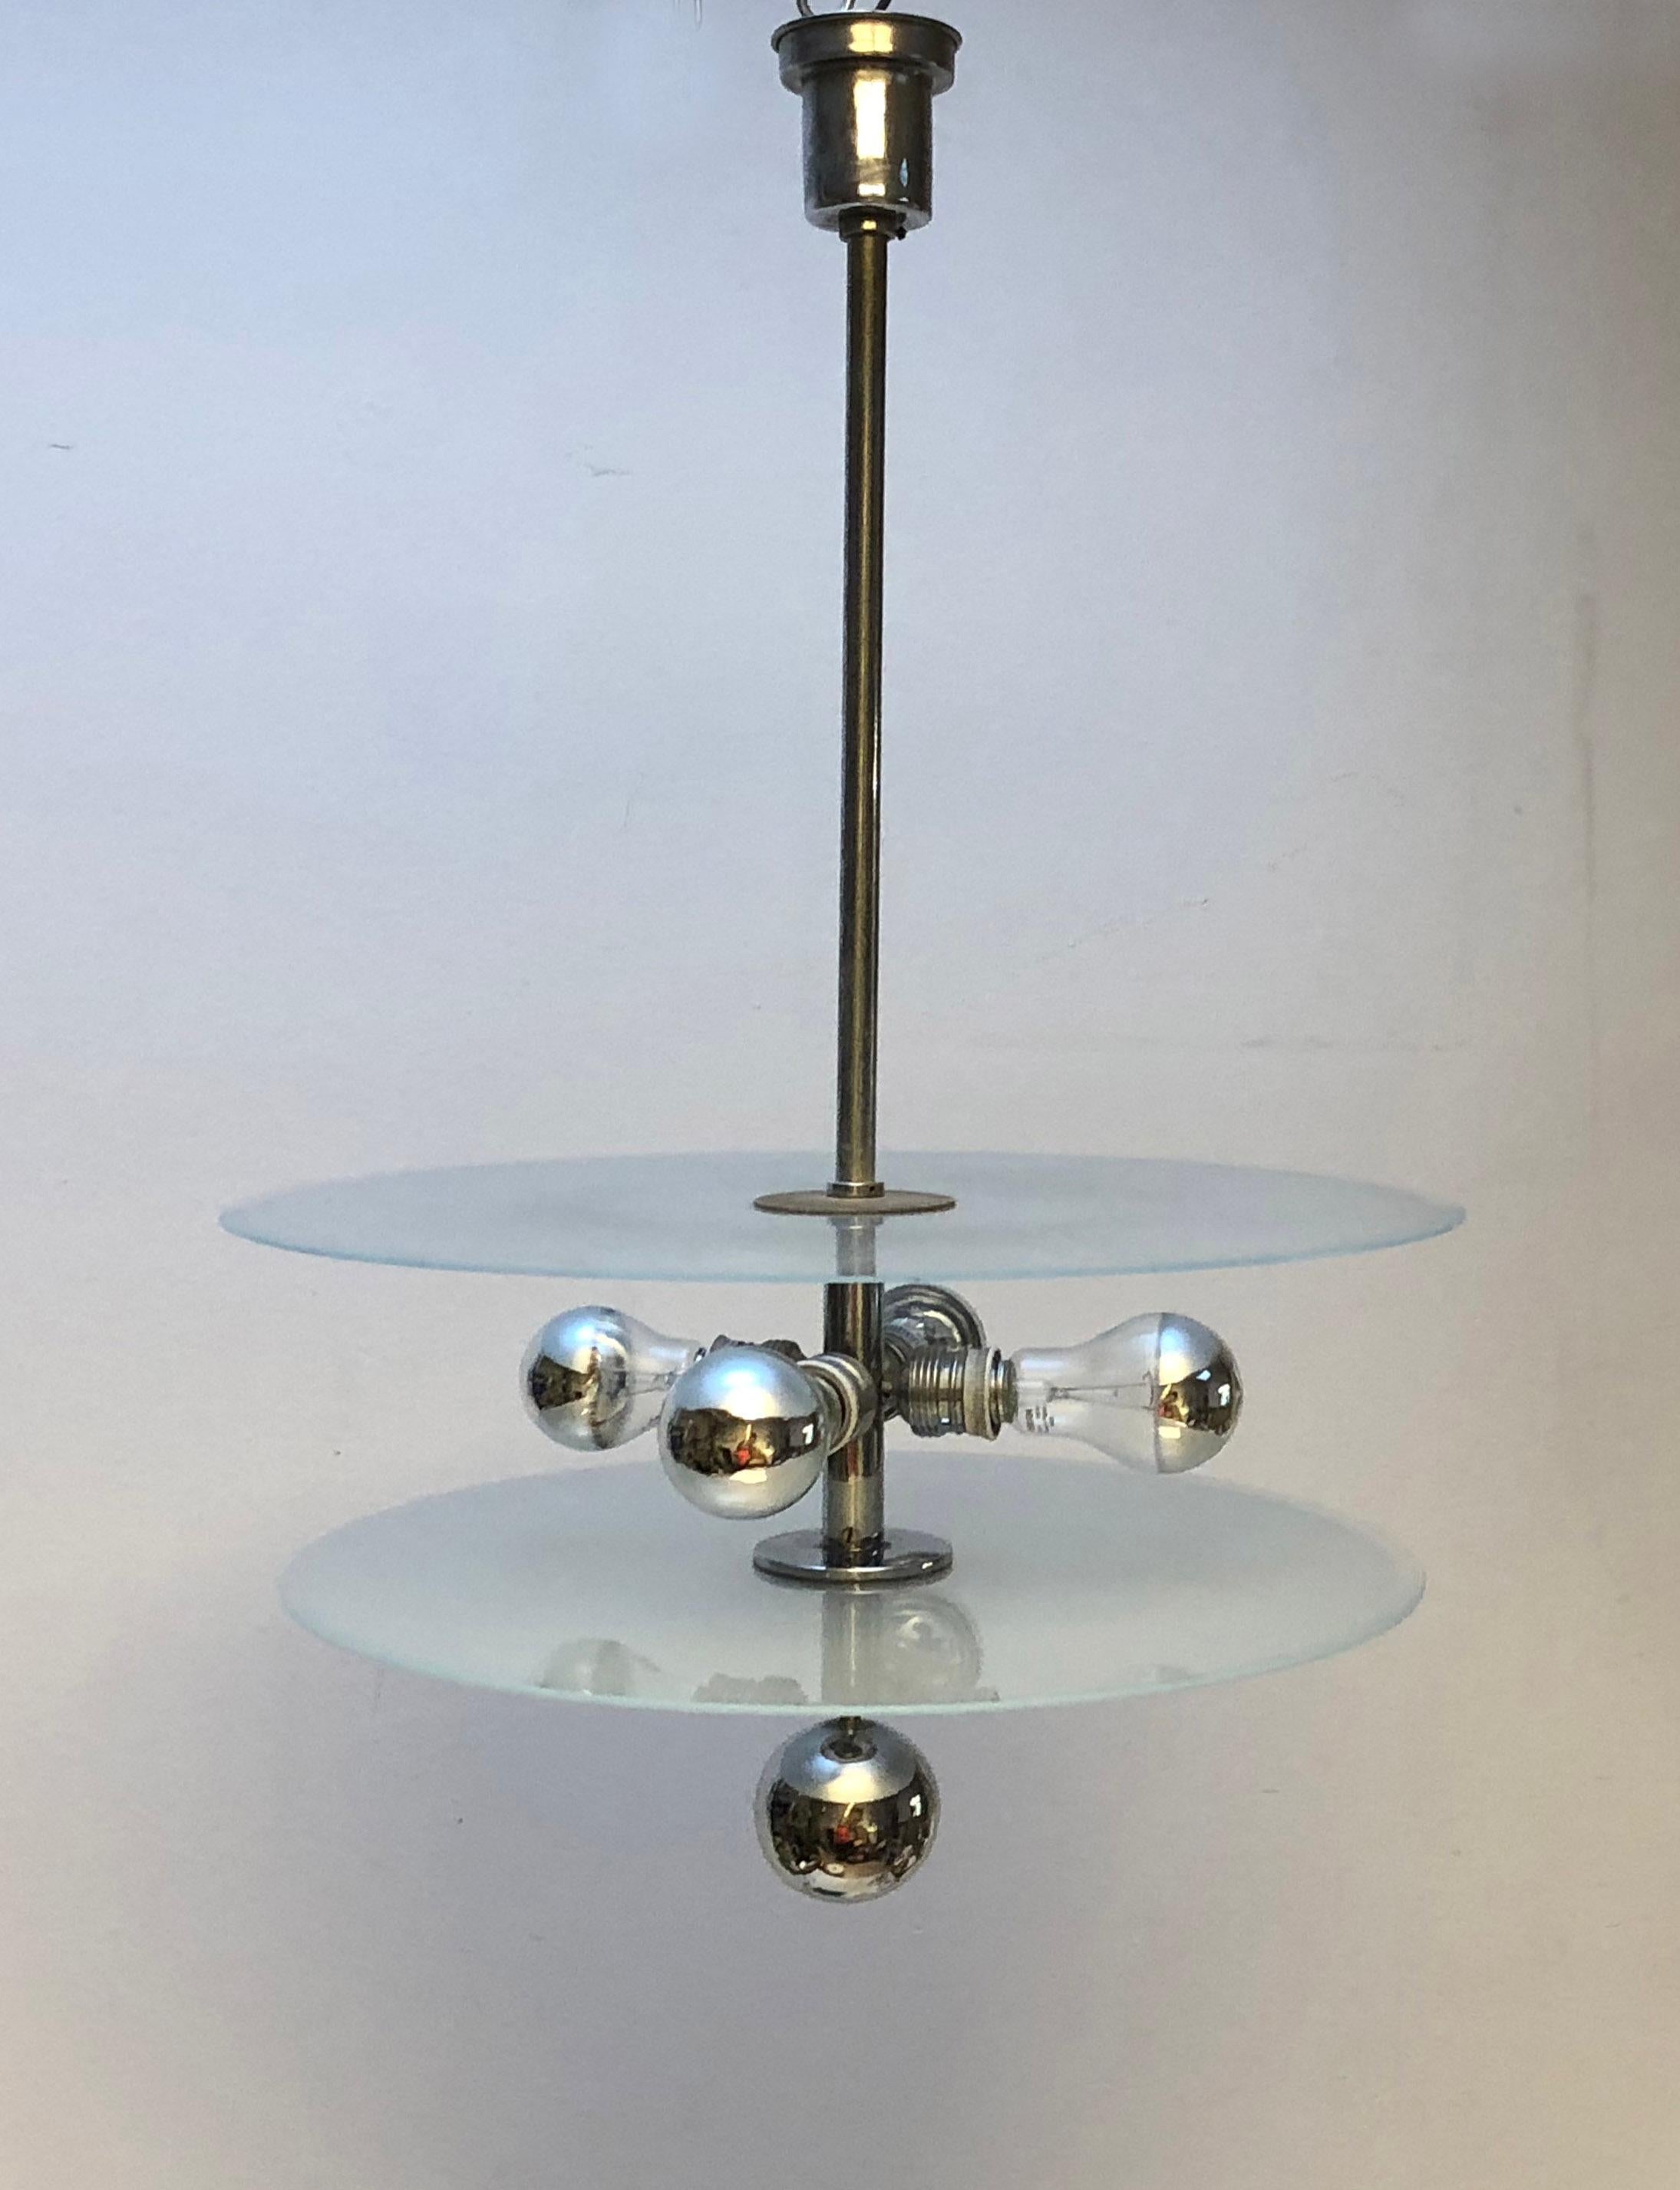 Bauhaus Chandelier by Schwintzer & Graeff from the 1930s For Sale 3